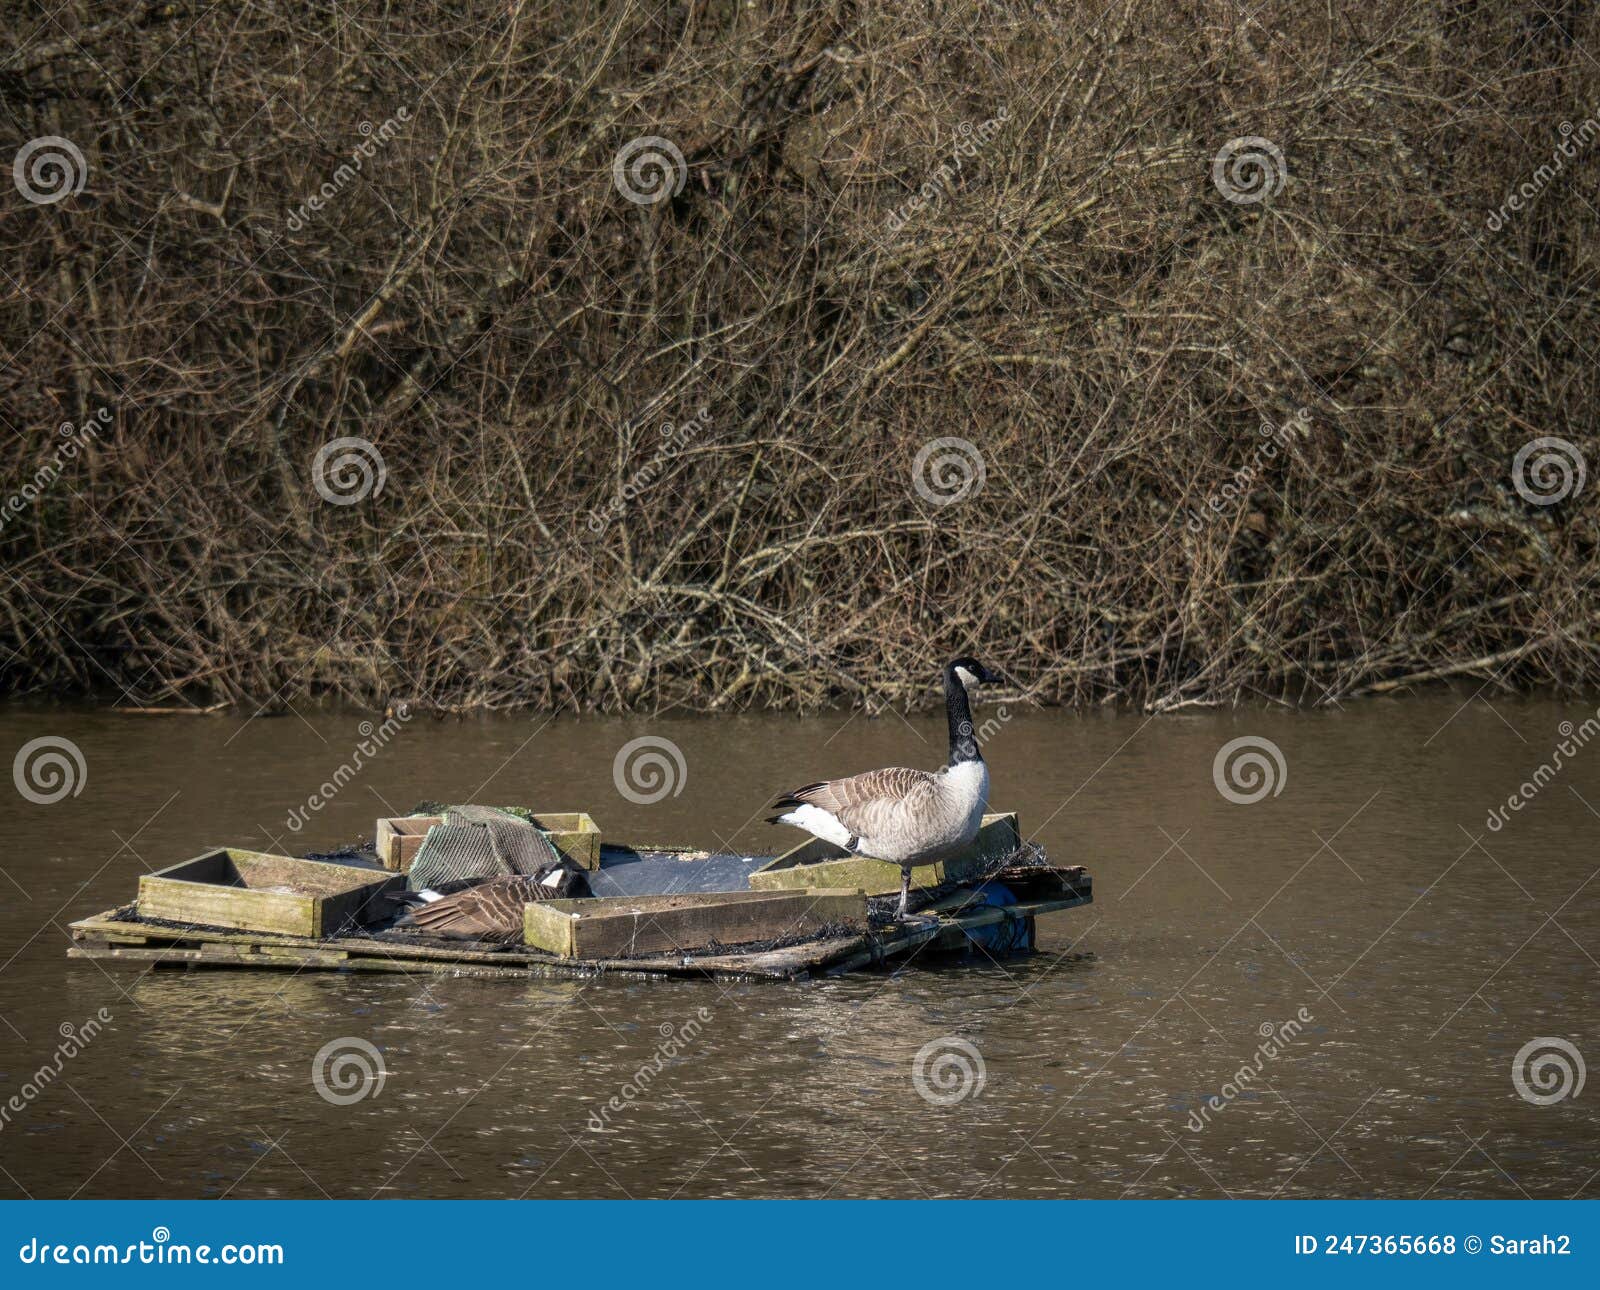 canada geese aka branta canadensis nesting on sanctuary lake in kenwith valley local nature reserve aka lnr, and